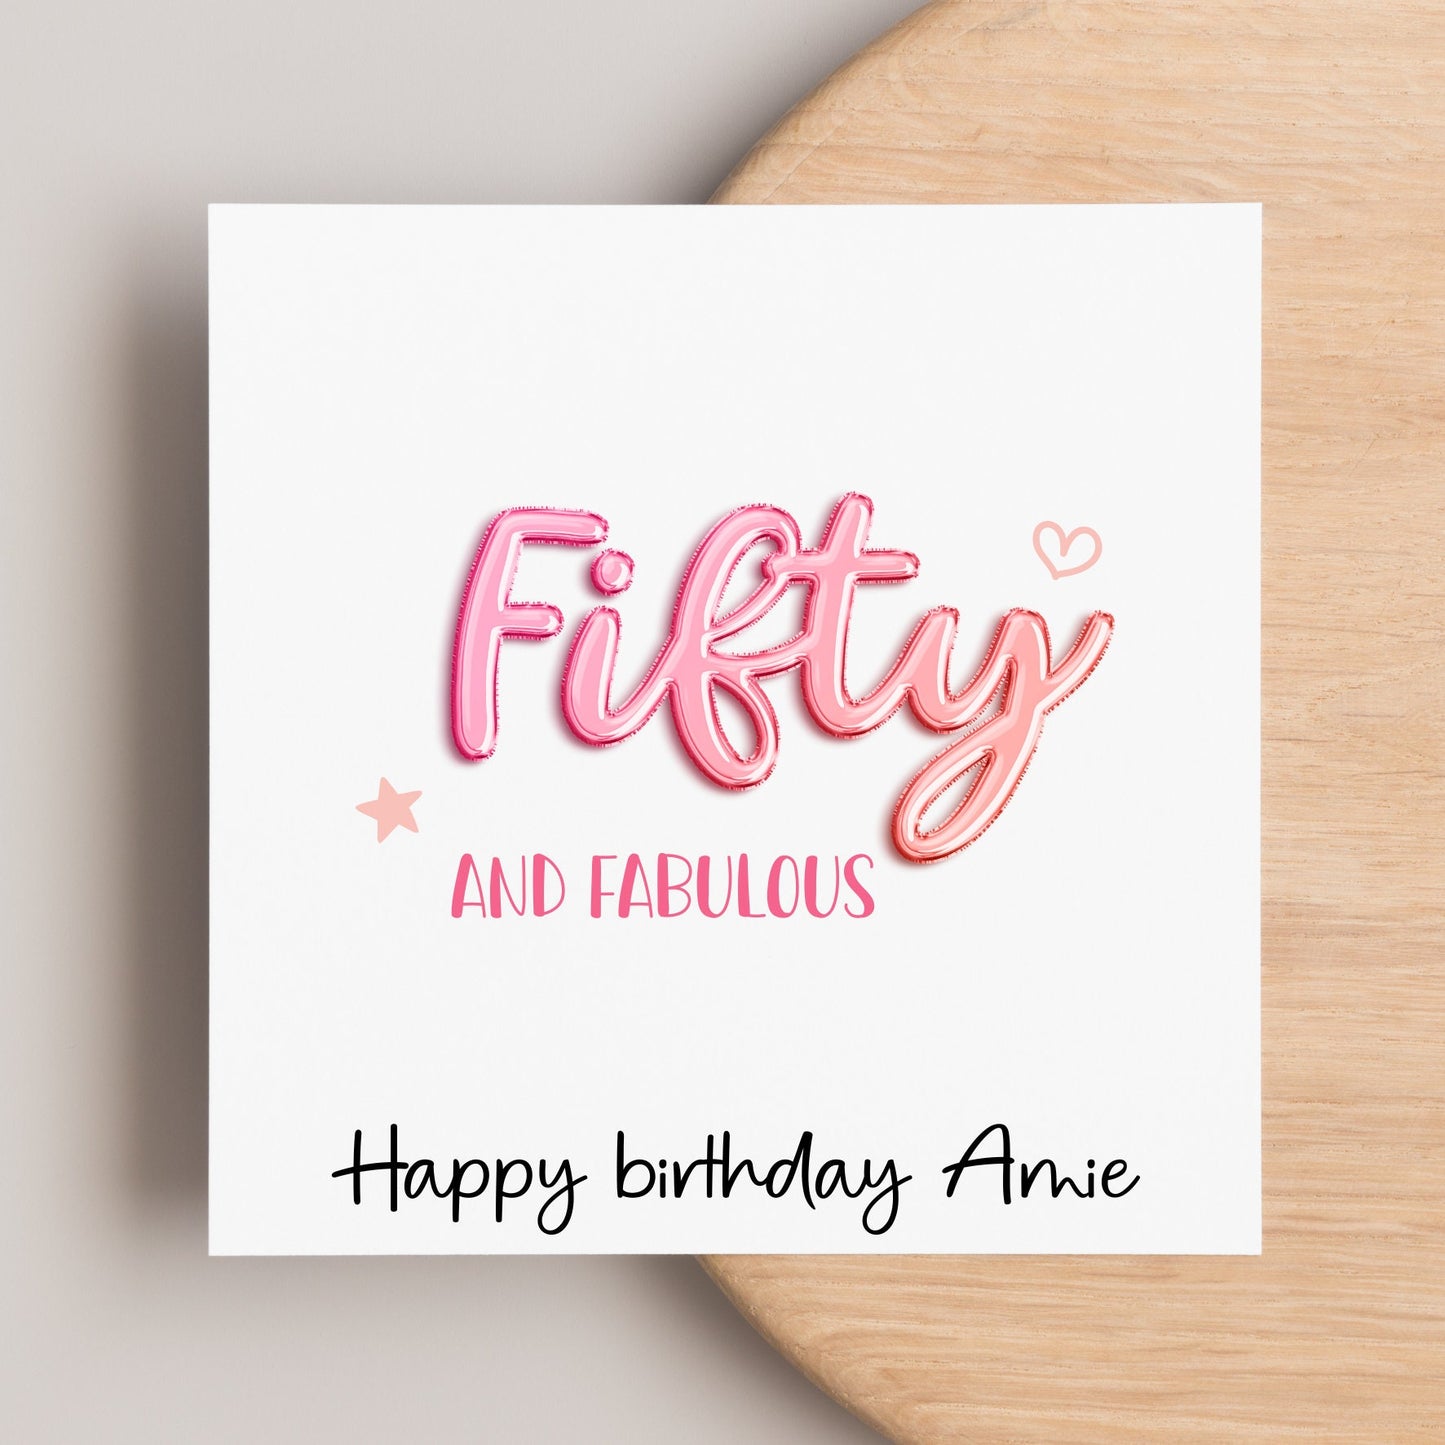 50 and fabulous card, 50th birthday card, personalised happy birthday card for mum, sister, auntie, friend, Gran, nanny